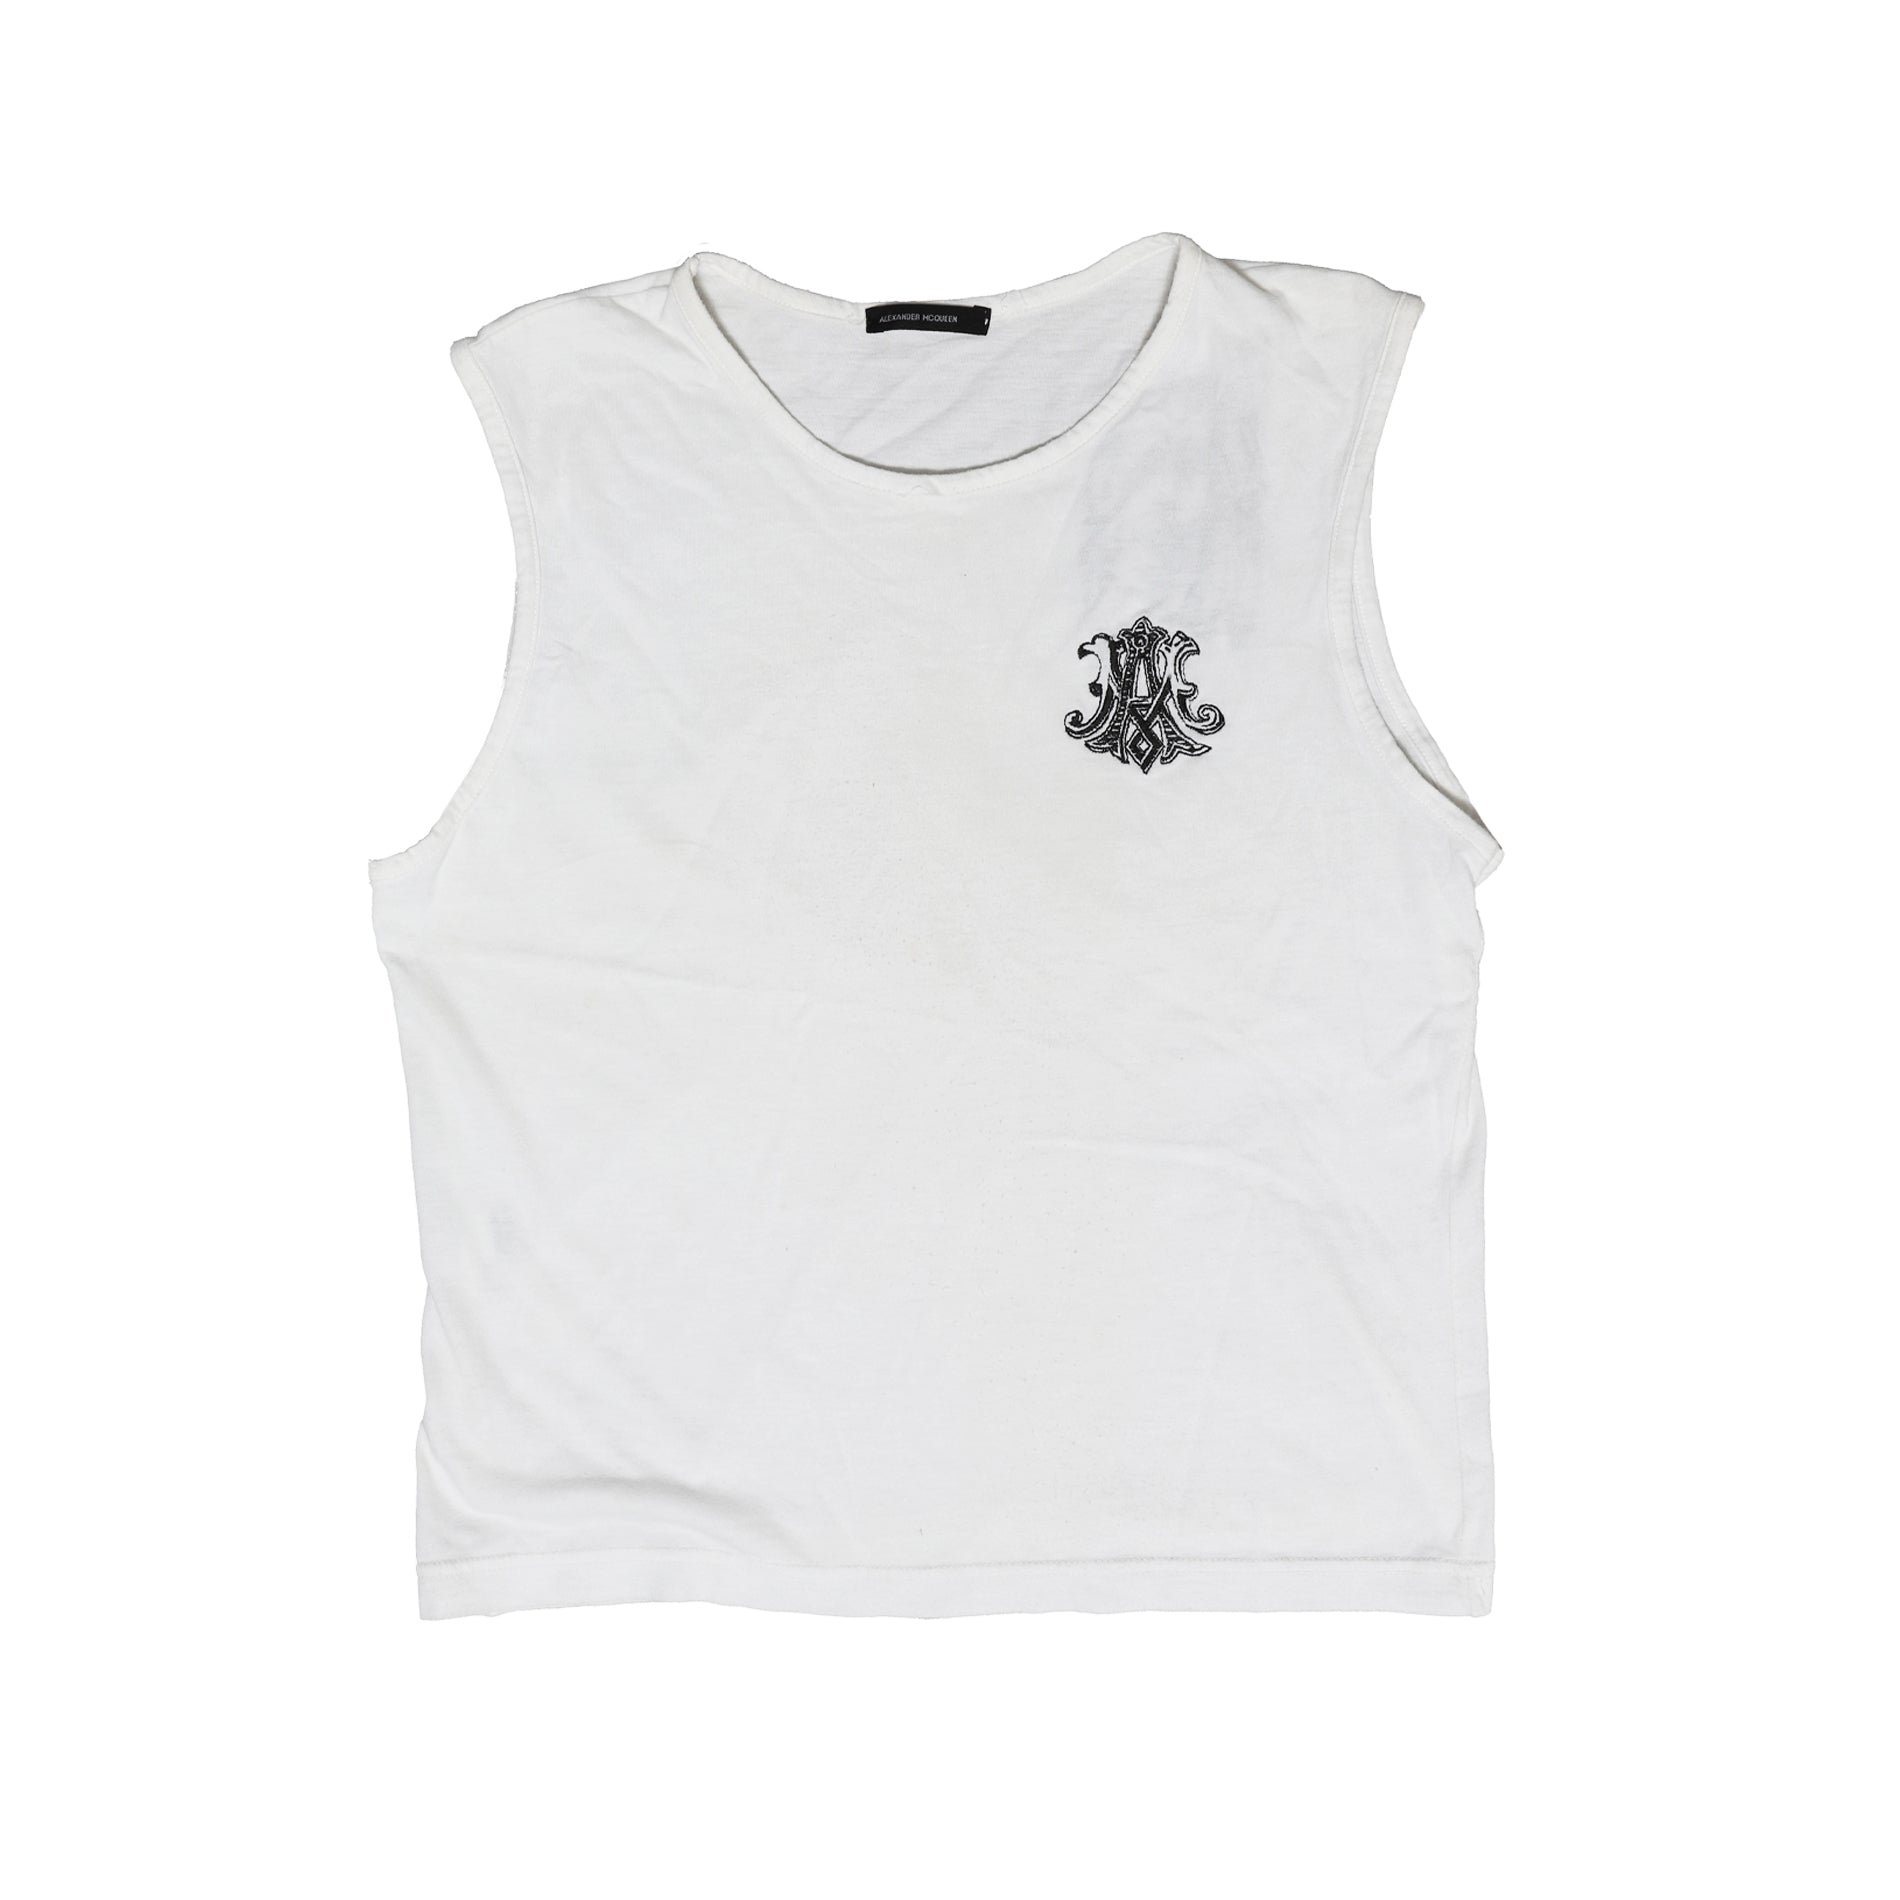 Alexander McQueen SS96 Embroidered White Tank Top